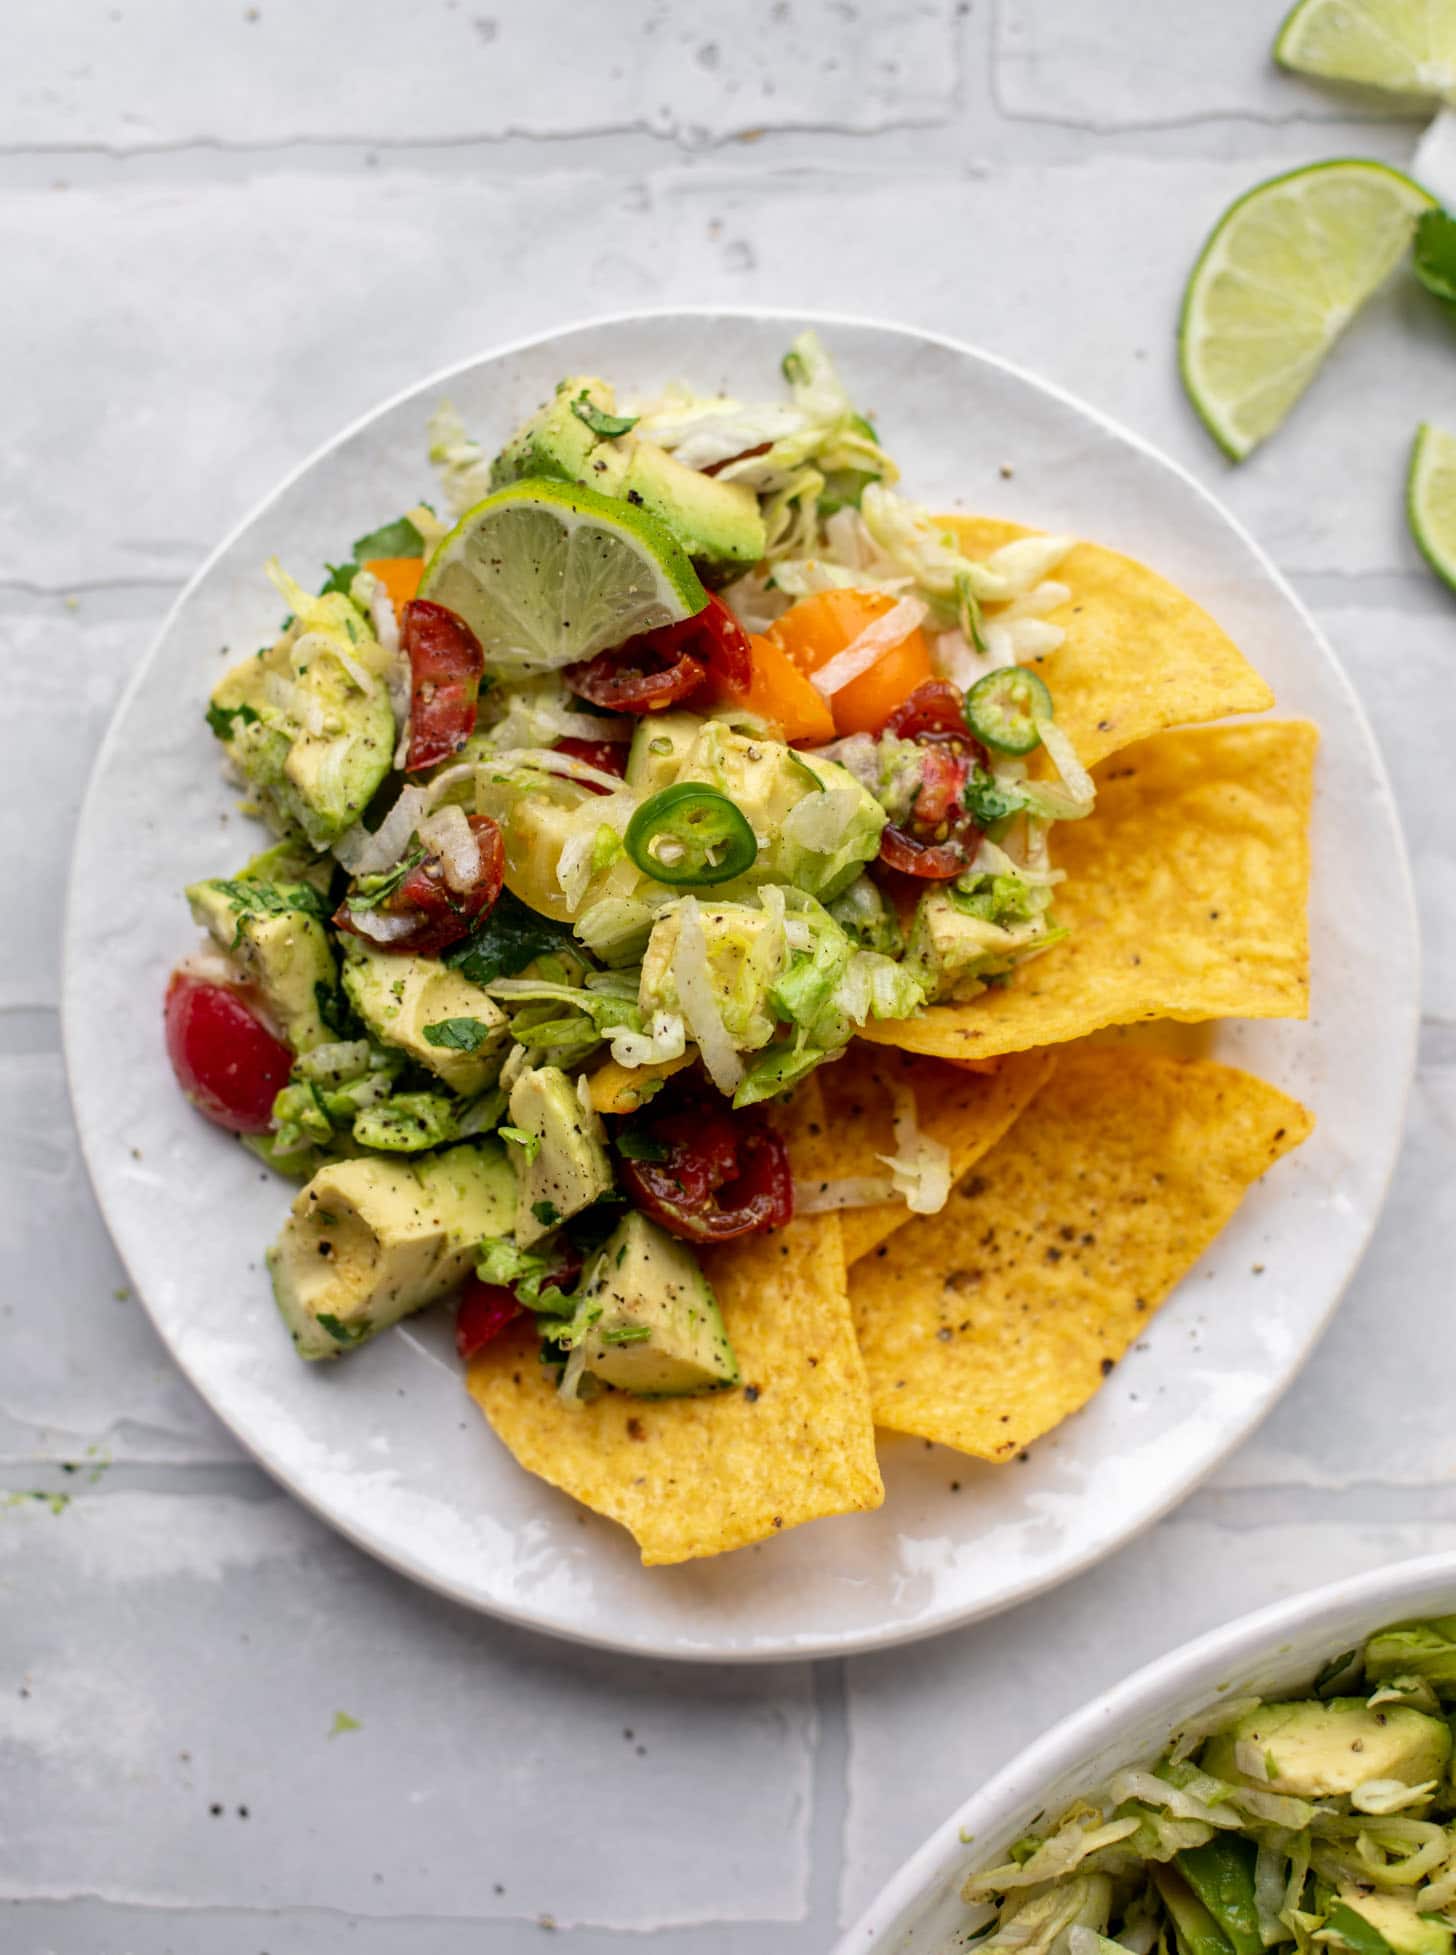 Guacamole salad with chips